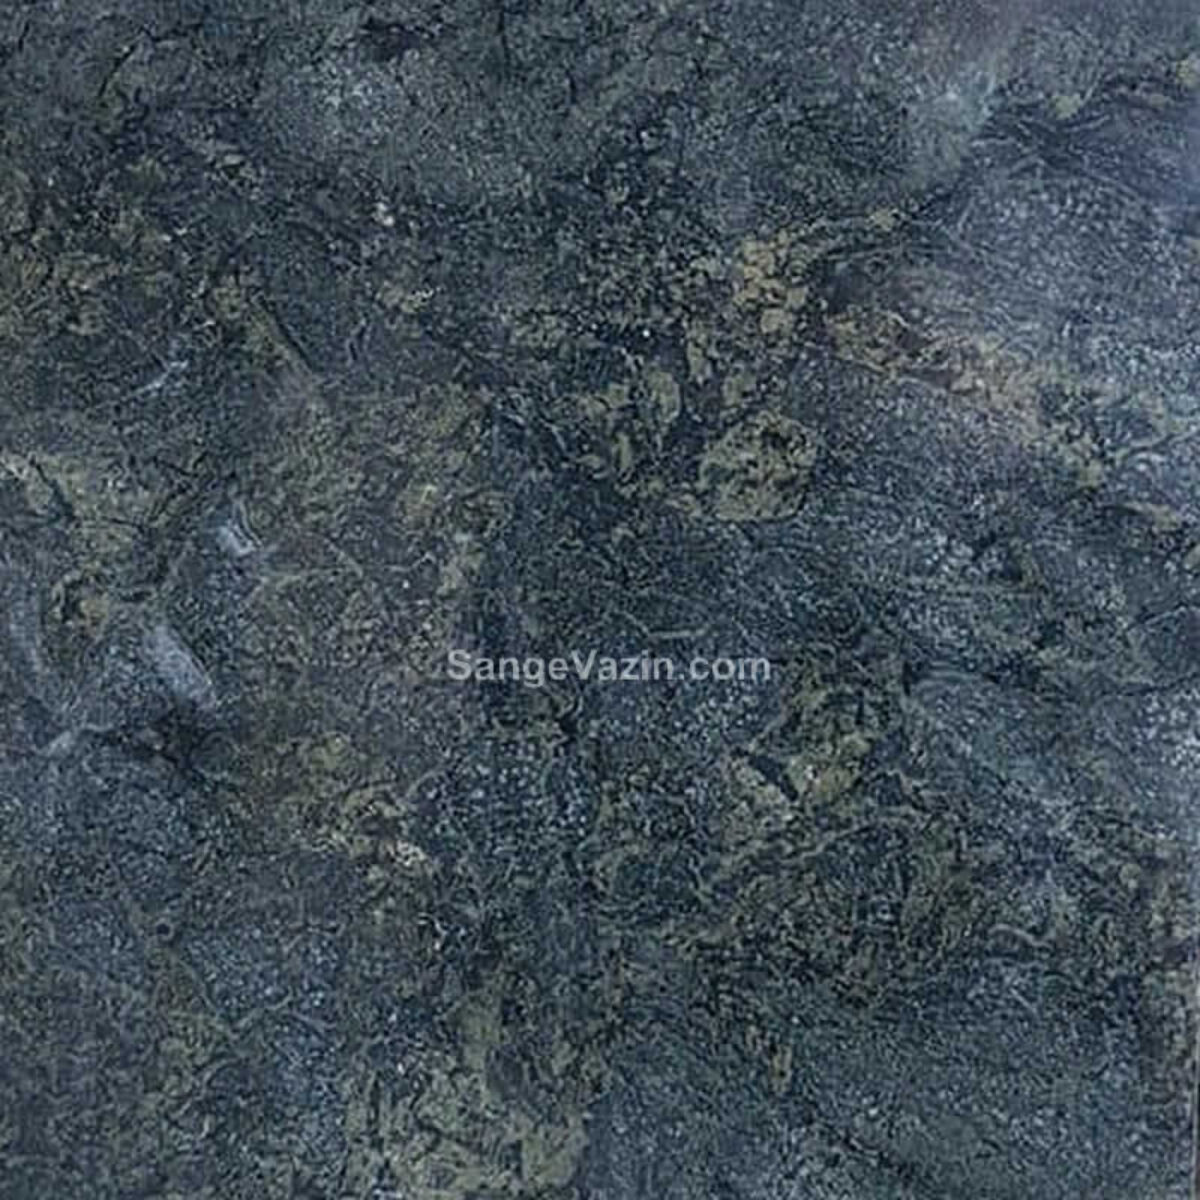 Iran Picasso Green Granite Polished Wall Slabs &Floor Tiles from